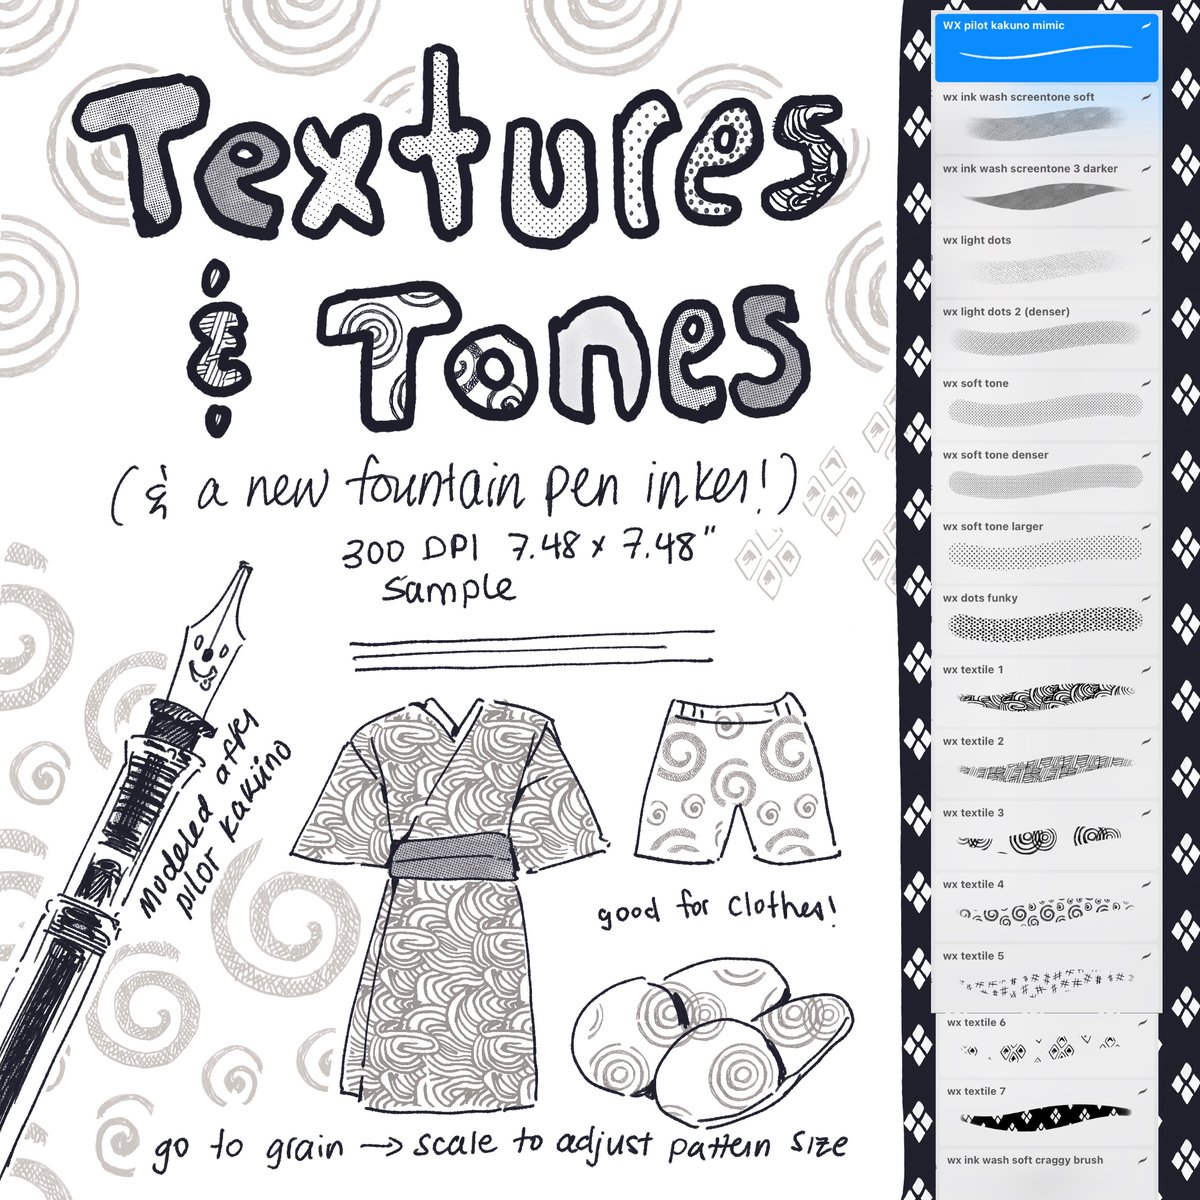 happy (?) monday everyone! textures and tones pack is LIVE! another fun comics pack for you! dots and textiles drawn on paper and scanned to give a more analog feel!  $3 (tips always appreciated), 🔗below. i always rec hex 20202c instead of pure black for a more layered ink feel 